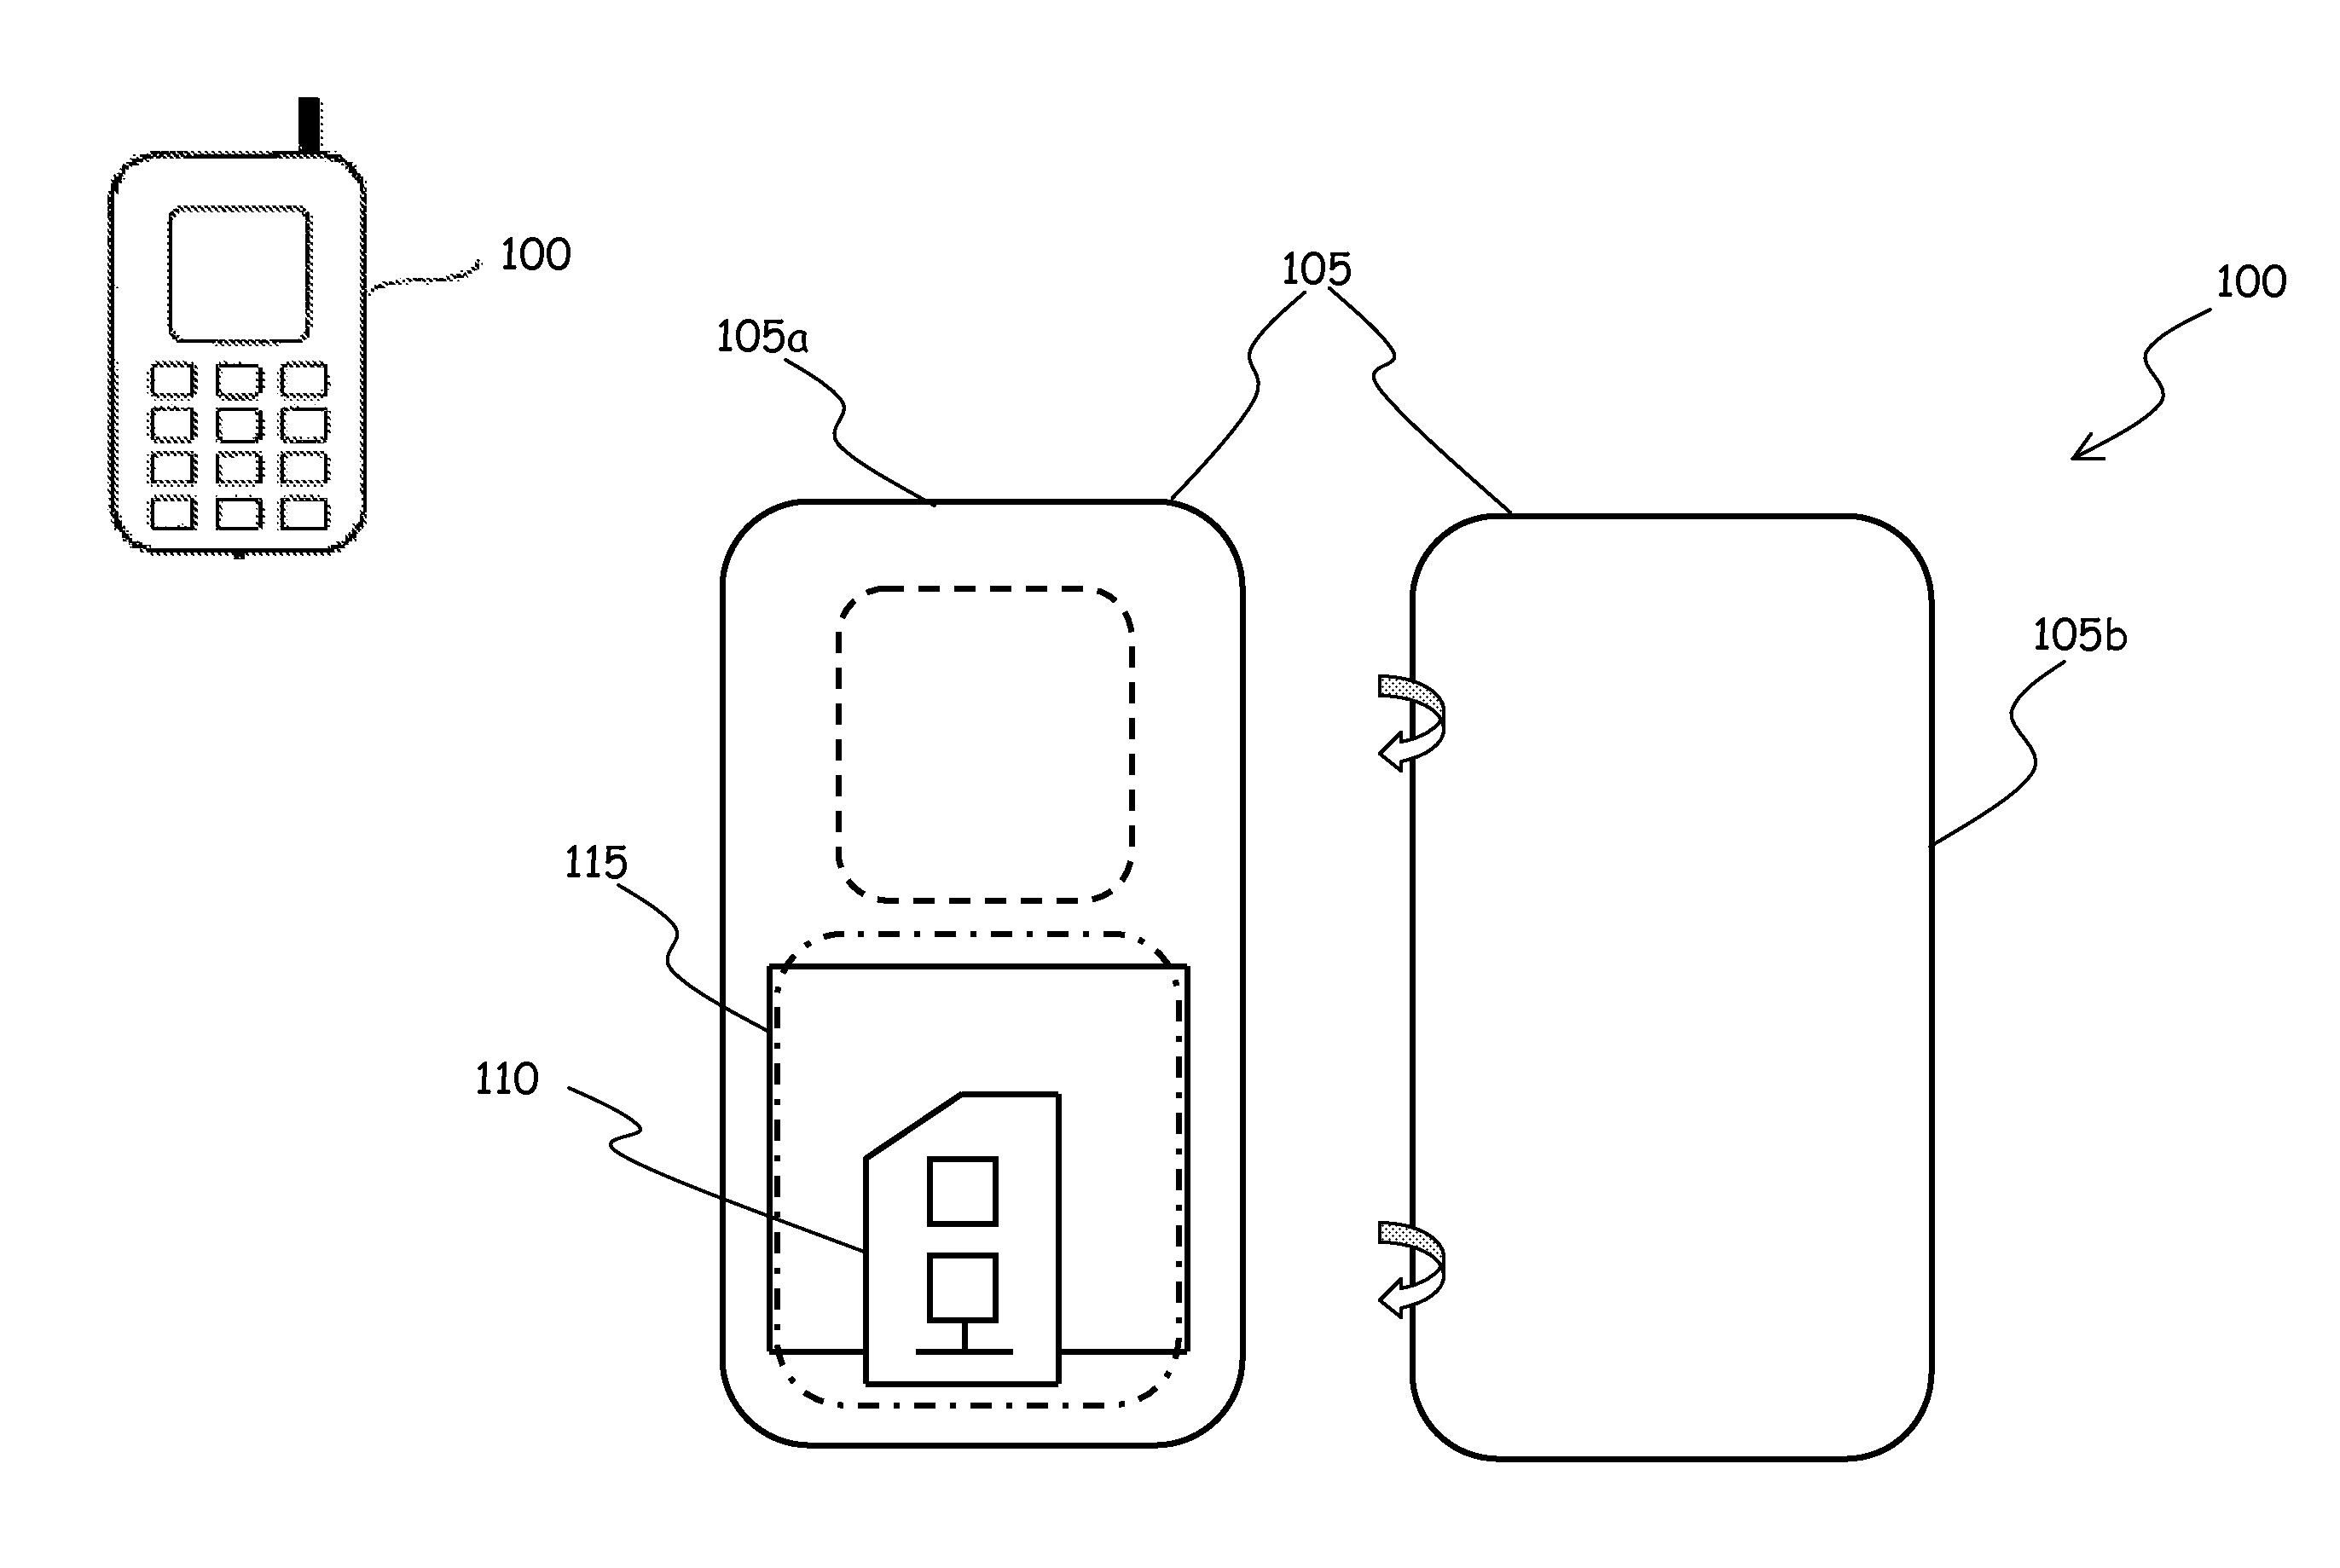 Radio coverage extender for a personal area network node embedded in a user communications terminal